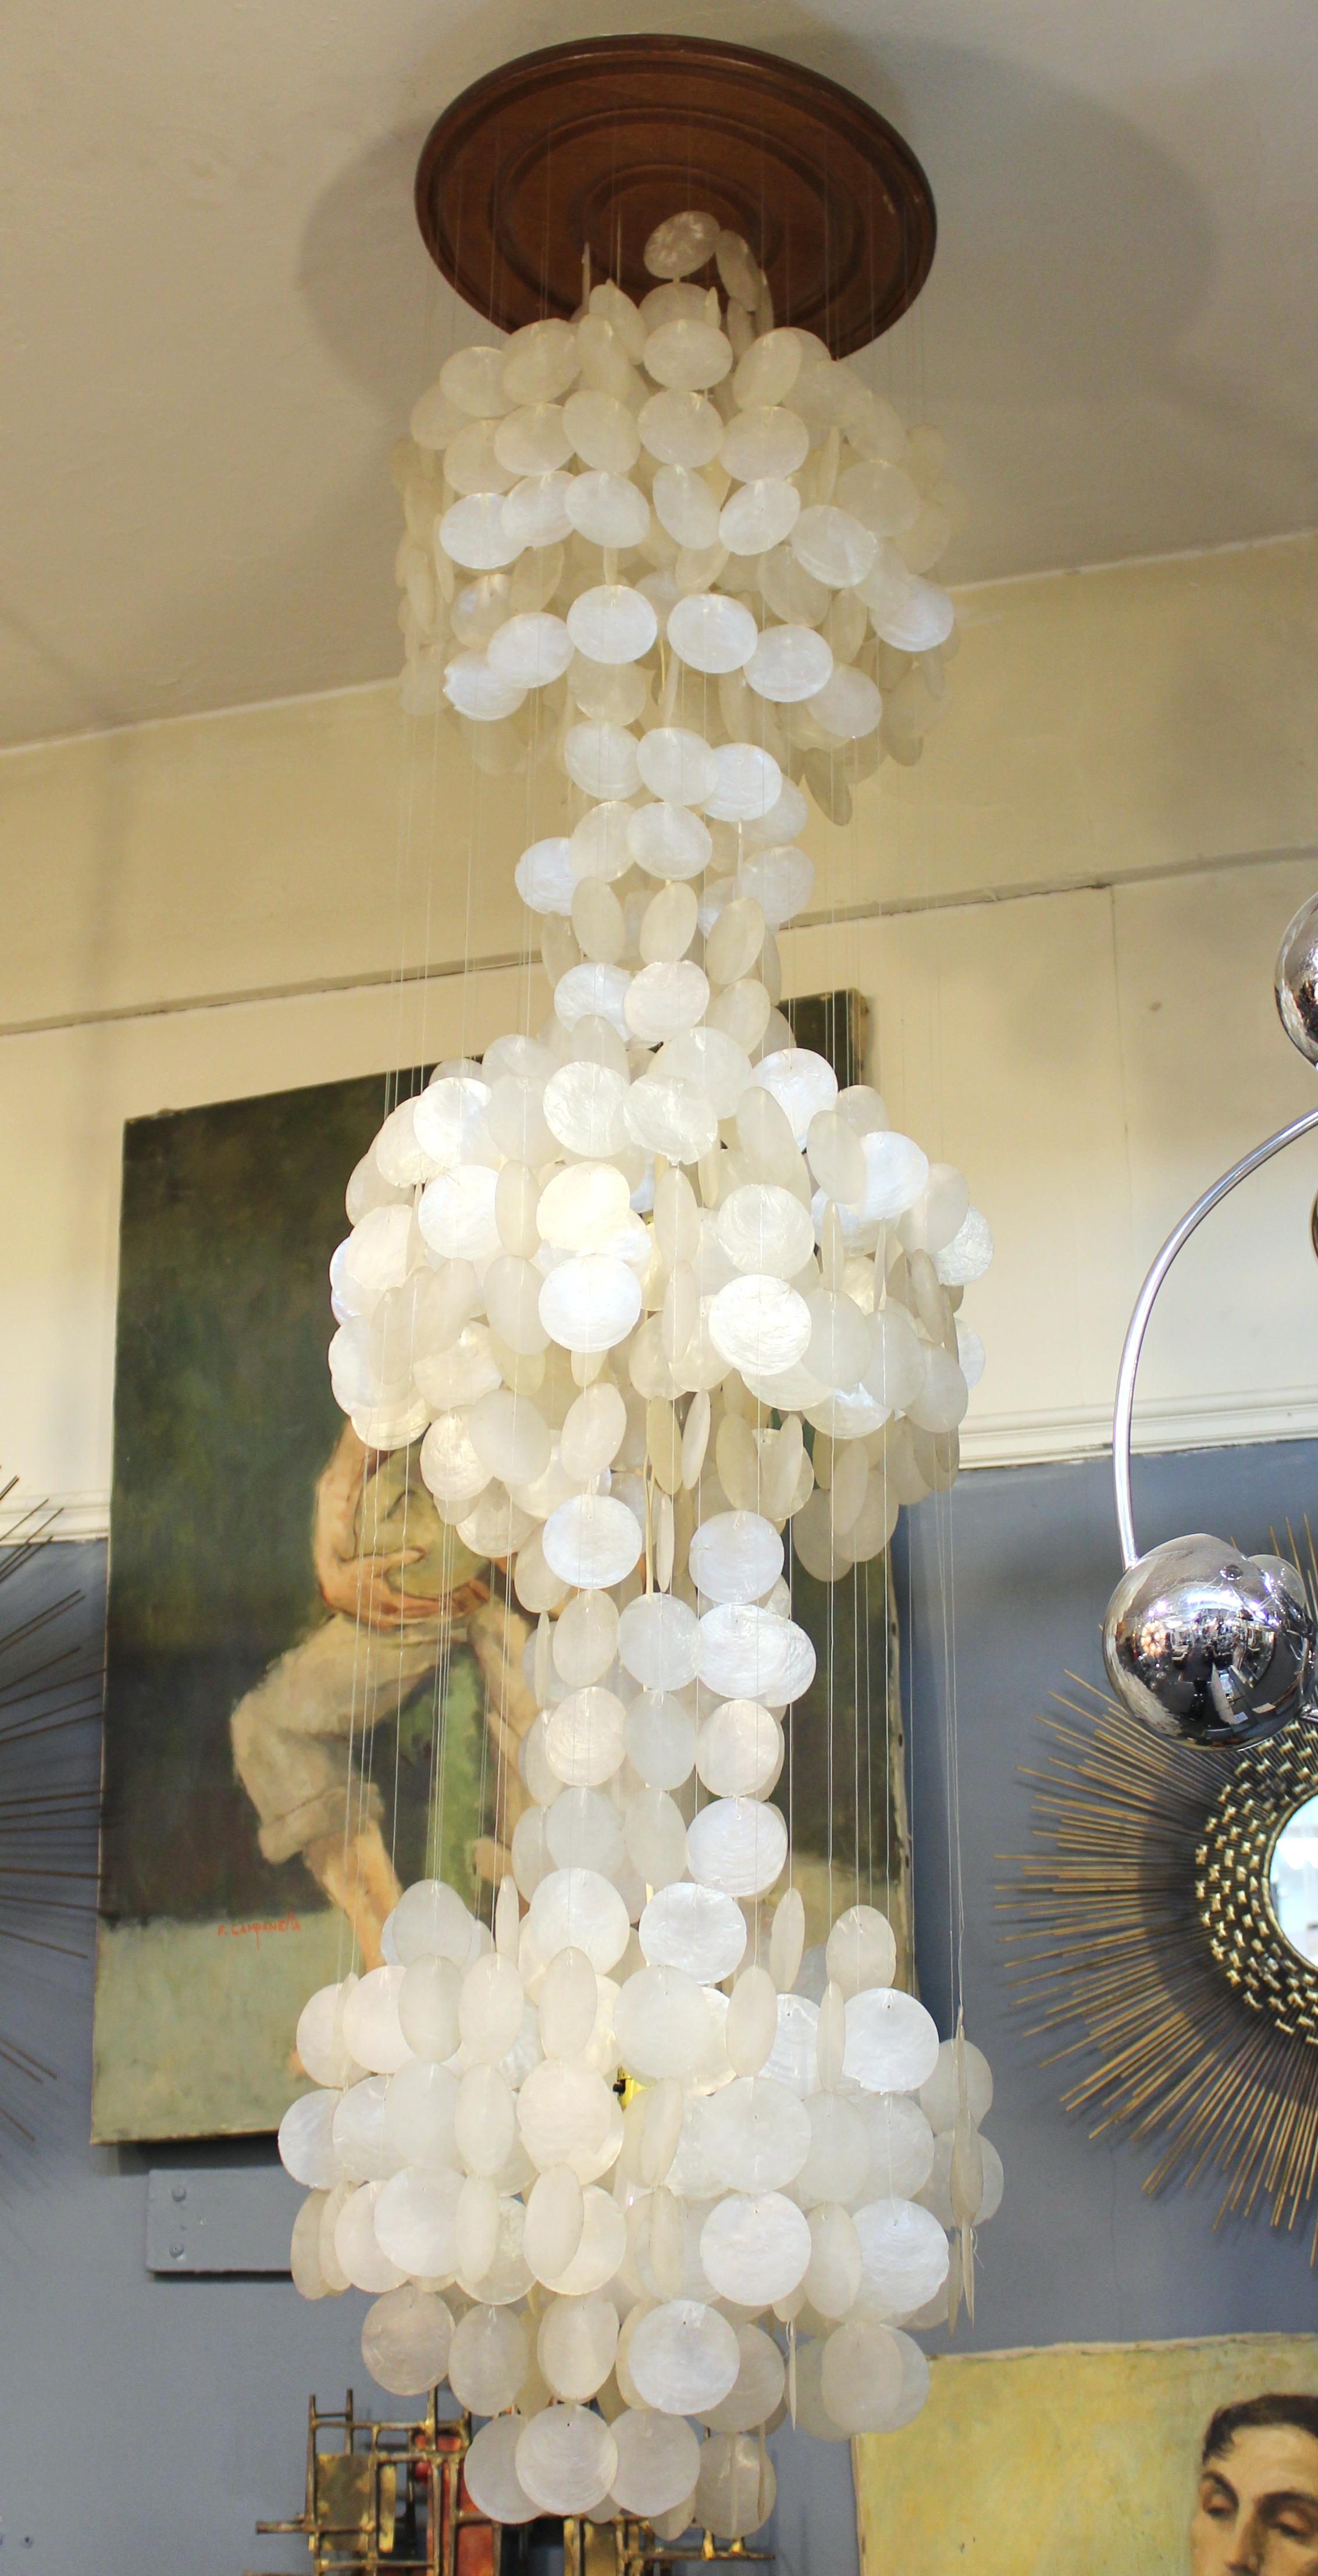 Mid-Century Modern monumental capiz shell chandelier, made by Verner Panton in the 1960s. The piece has a wooden mount piece and three levels of spheres shaped by hanging capiz shell discs. In great vintage condition.